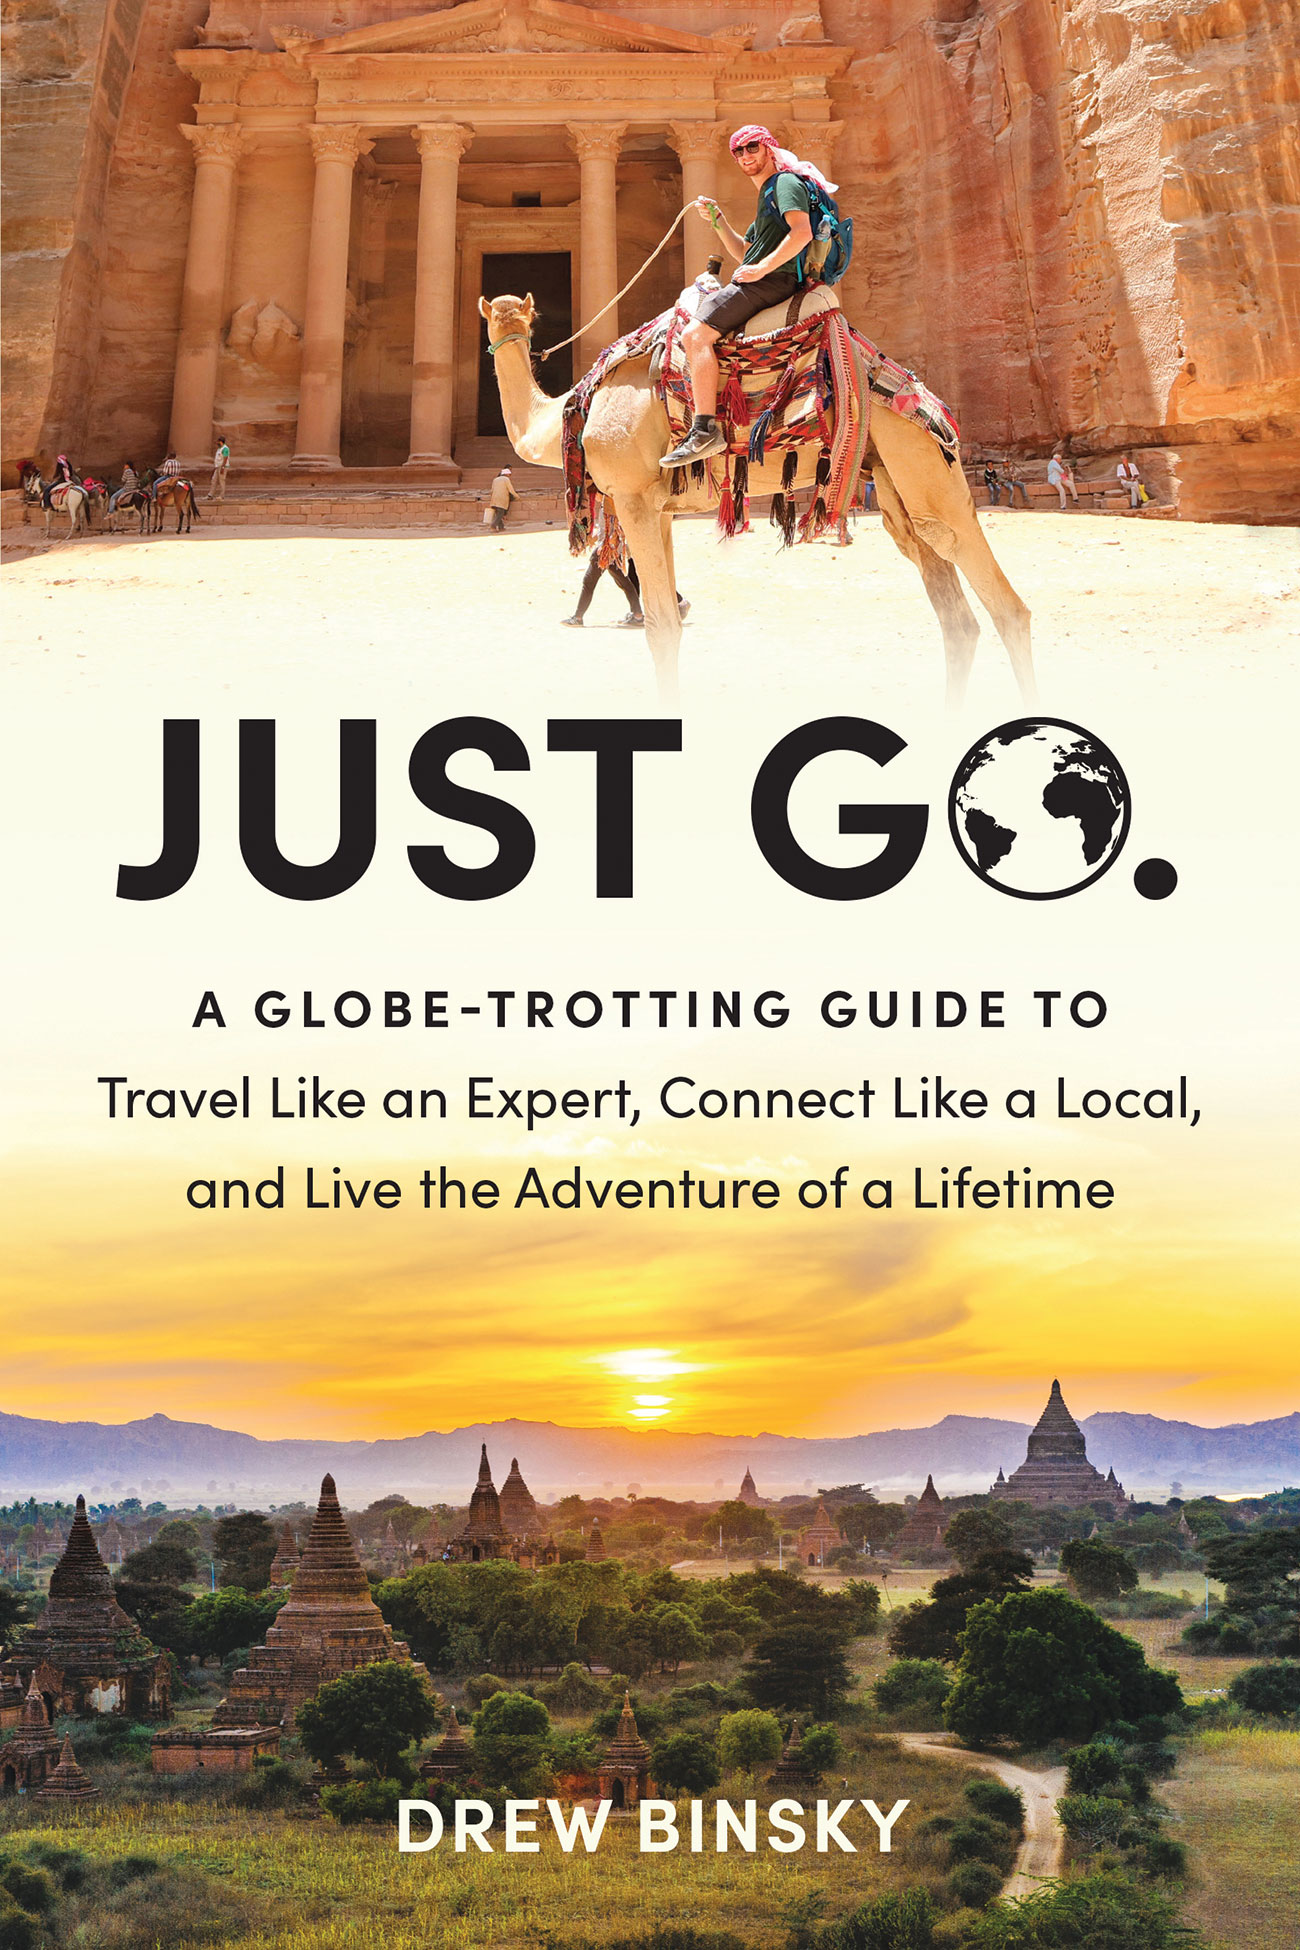 Book Launch: Just Go: A Globe-Trotting Guide to Travel Like an Expert, Connect Like a Local, and Live the Adventure of a Lifetime by Drew Binsky